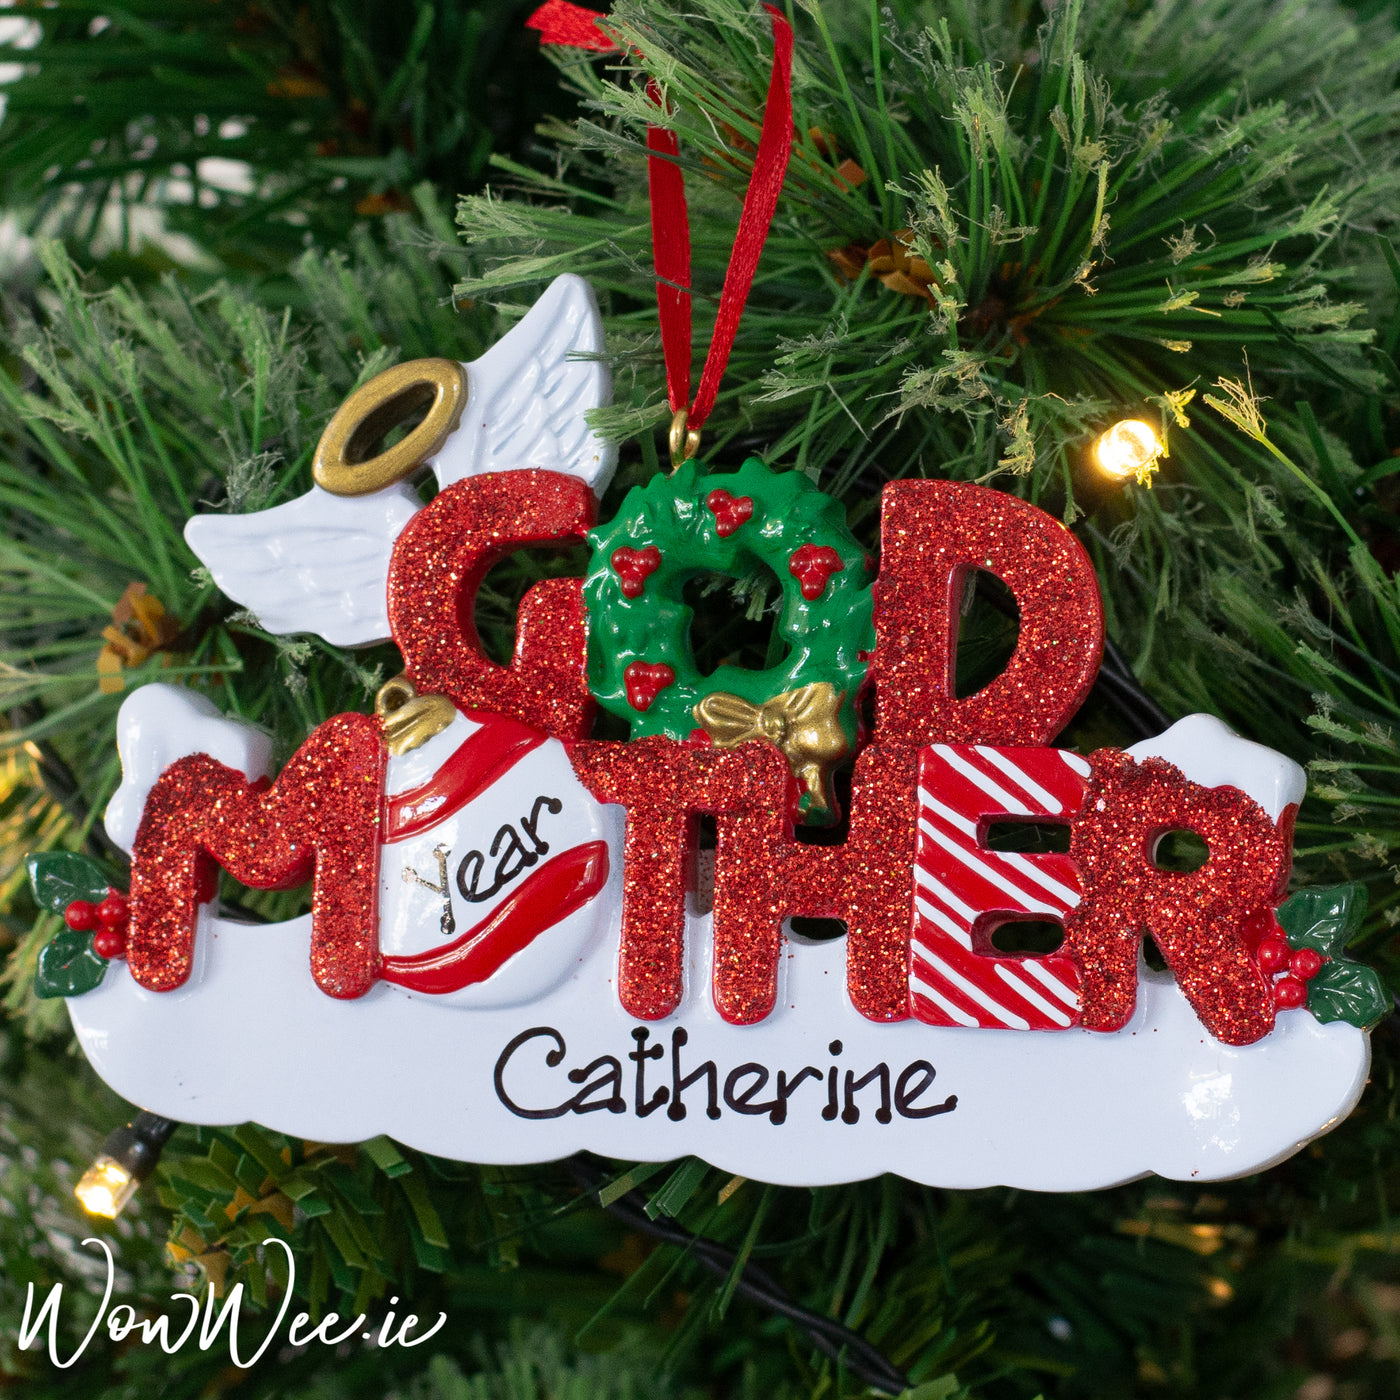 Personalised Christmas Ornaments make gorgeous gifts for special loved ones in our lives. 